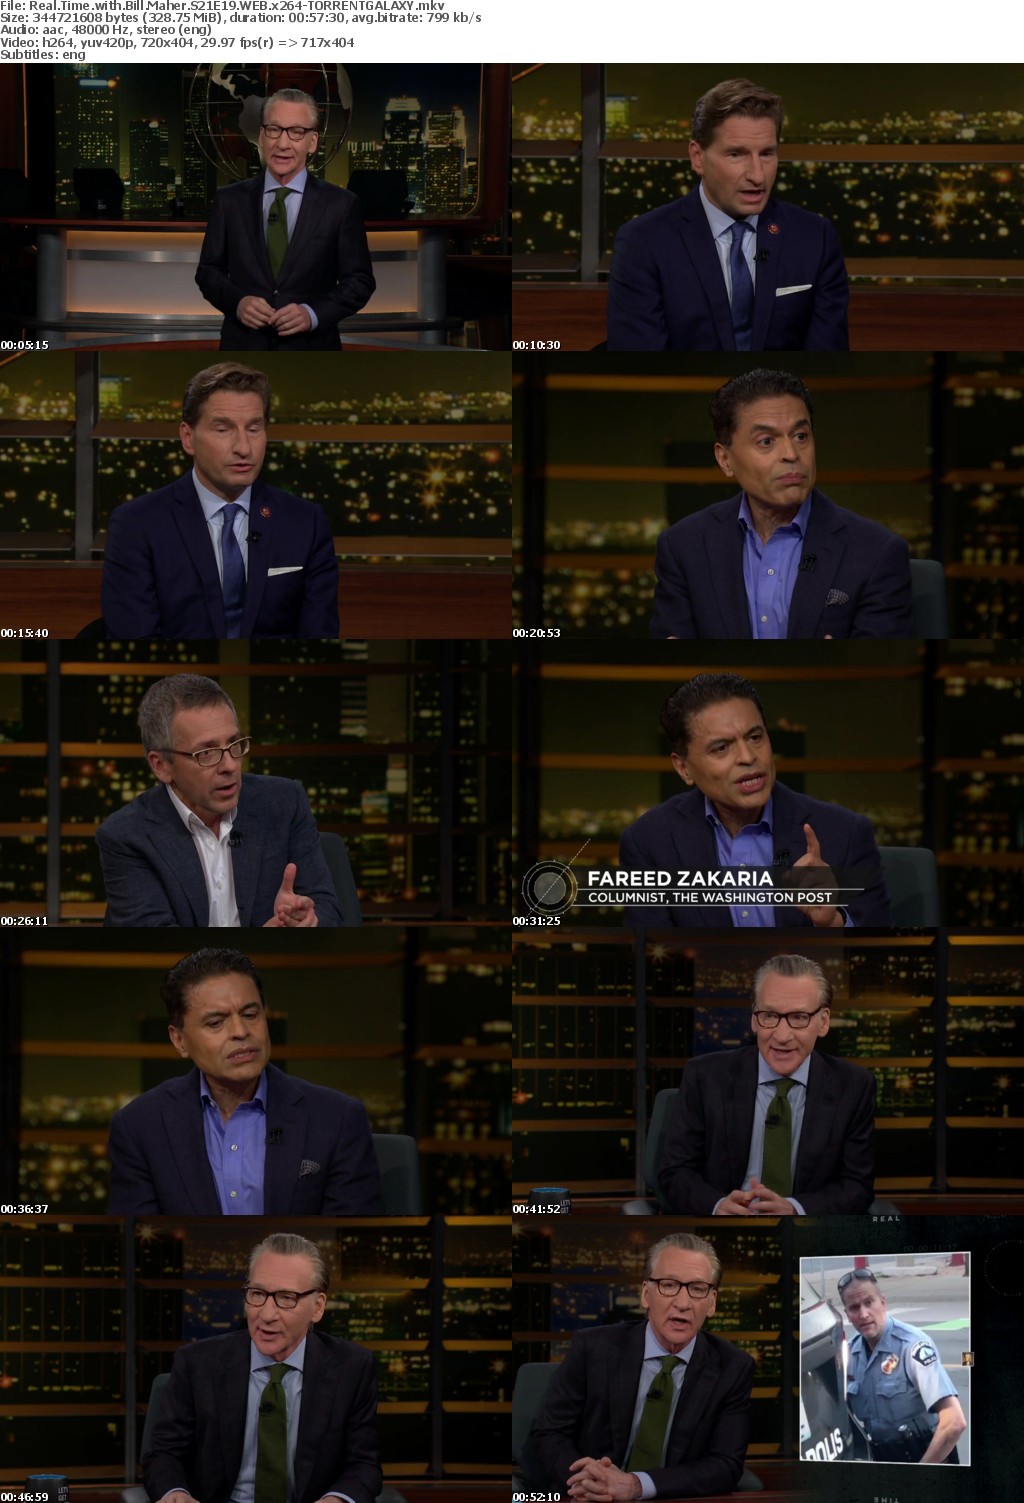 Real Time with Bill Maher S21E19 WEB x264-GALAXY